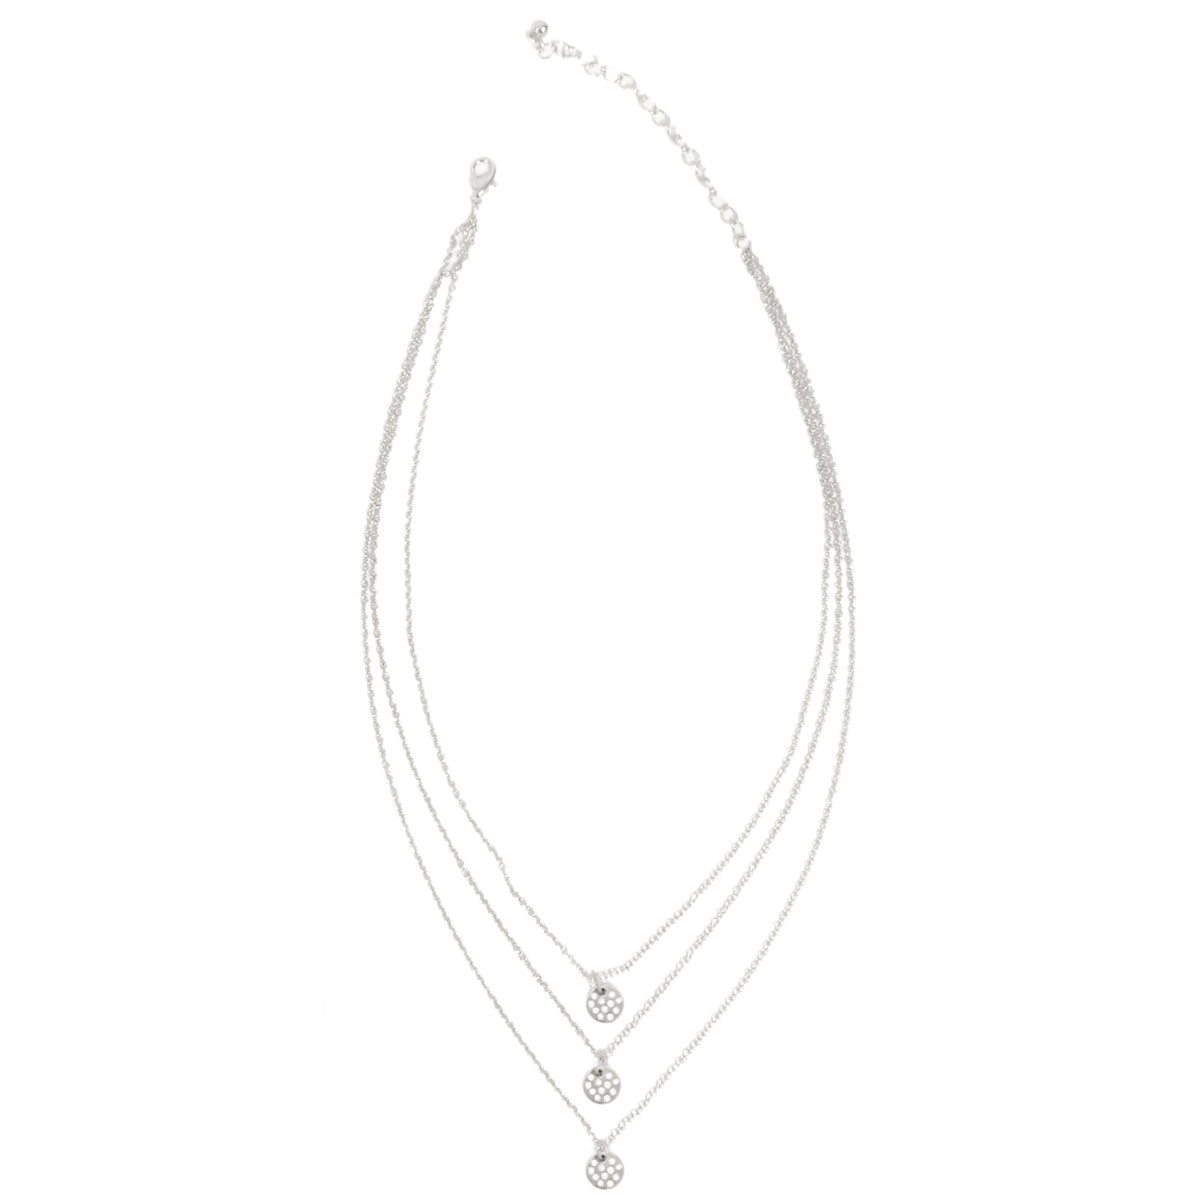 Wrapables Triple Strand Crystal Disc Pendant Necklace